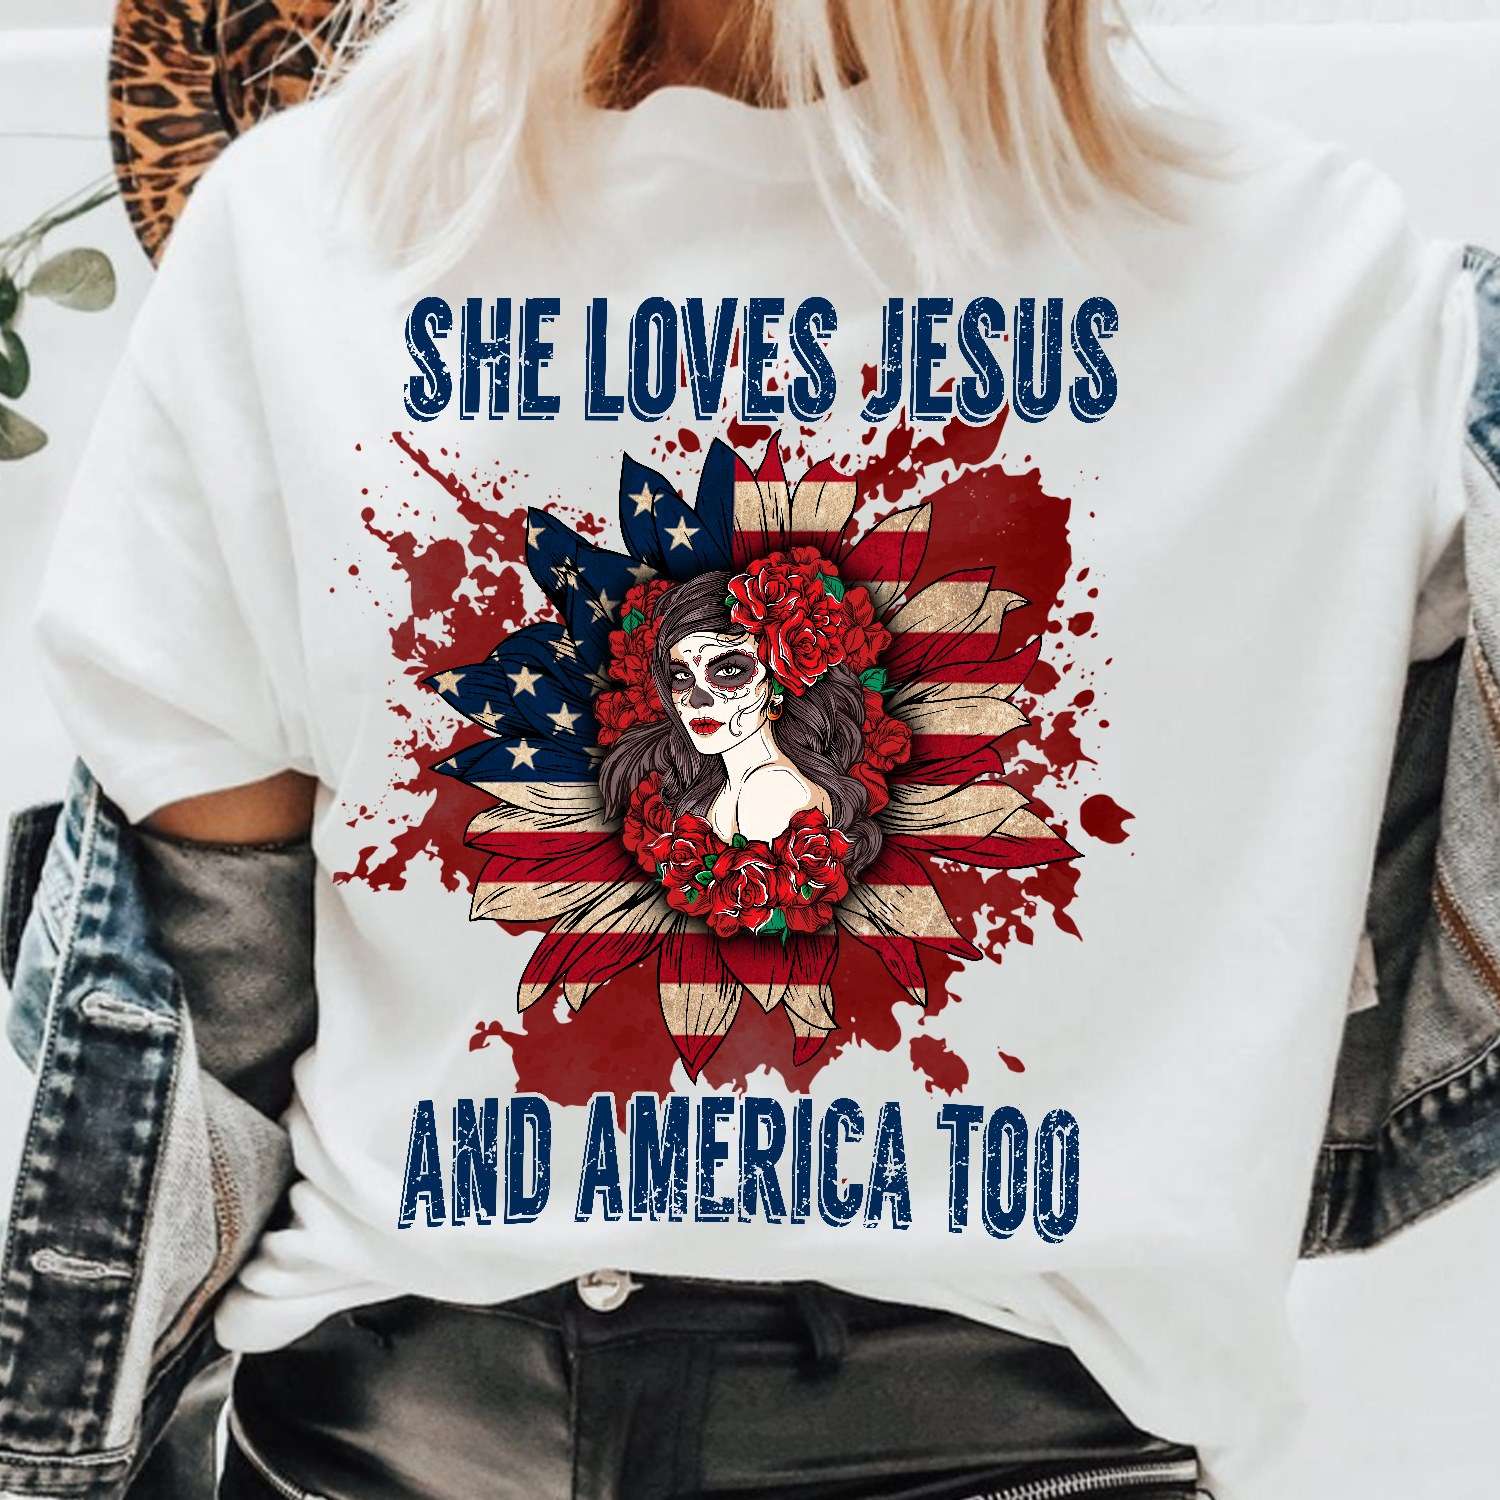 She loves Jesus and America too - America nation under God